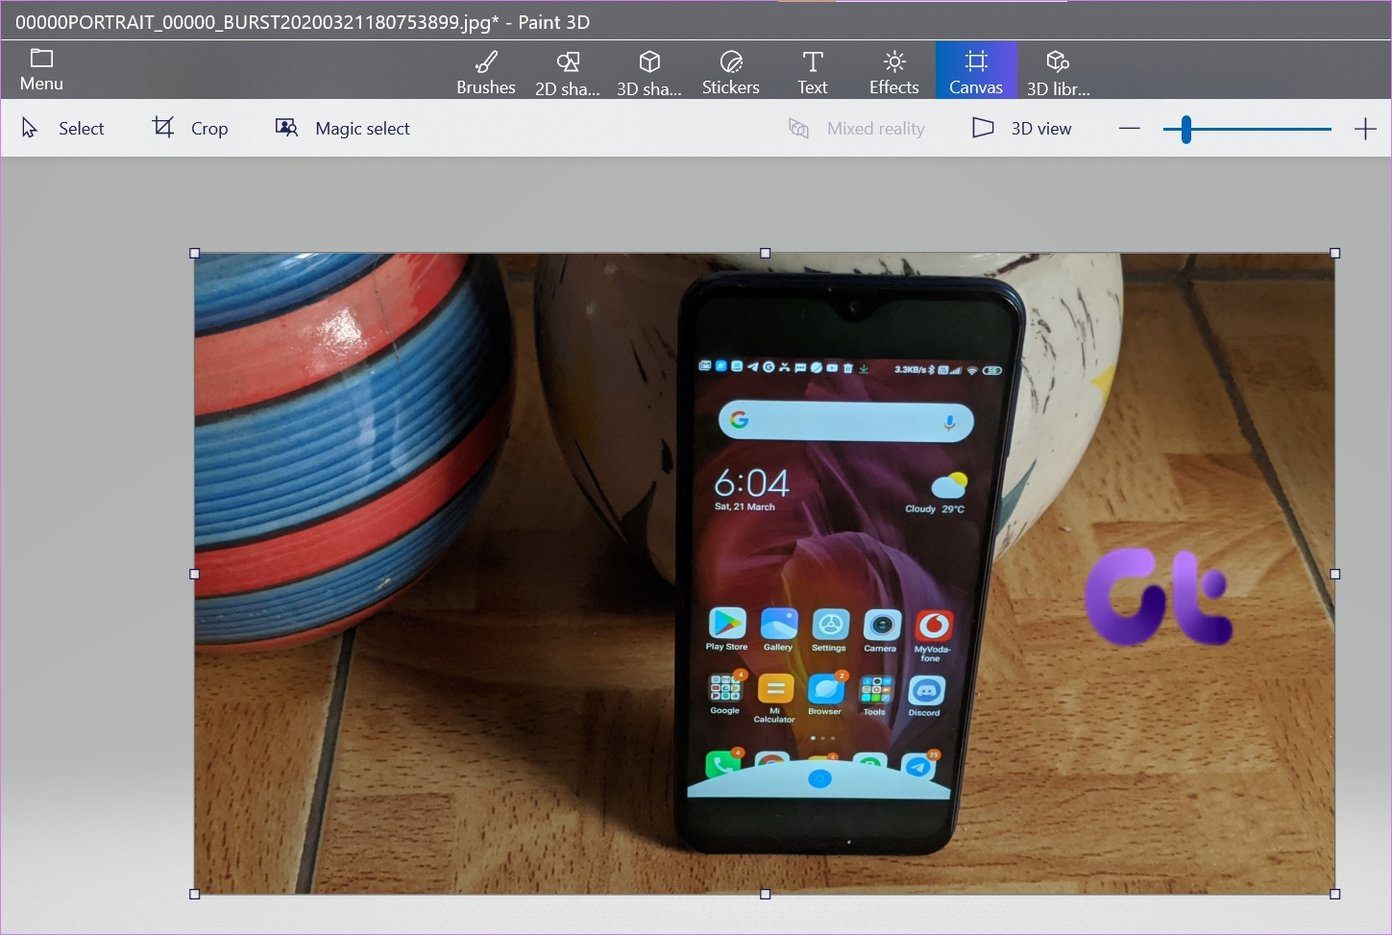 How to use paint 3d to edit photos 4